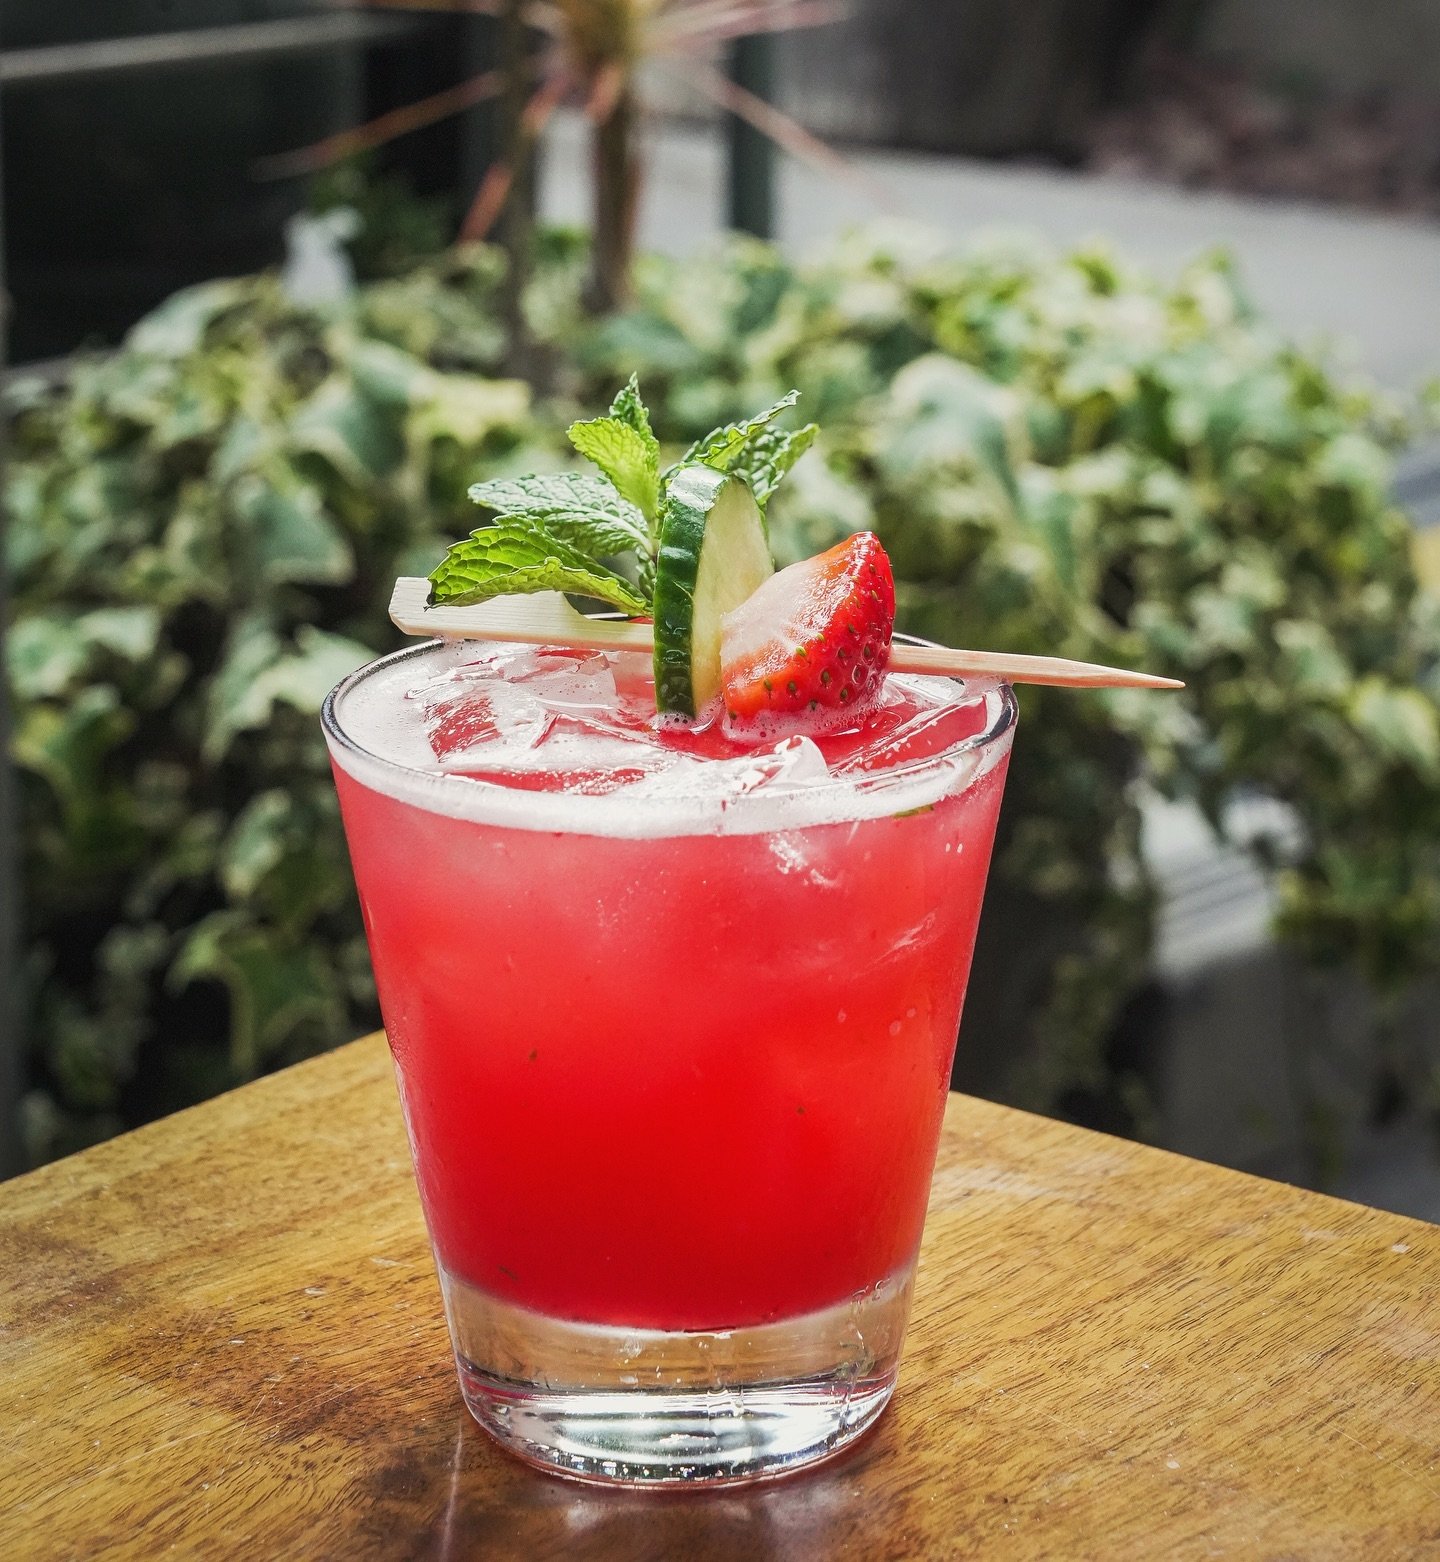 ✨NEW FEATURED COCKTAIL✨
Strawberry Cucumber Mint Margarita 🍓🥒

Blanco tequila, strawberry pur&eacute;e, muddled mint, lime juice, garnished with strawberry &amp; cucumber

Available all month long!